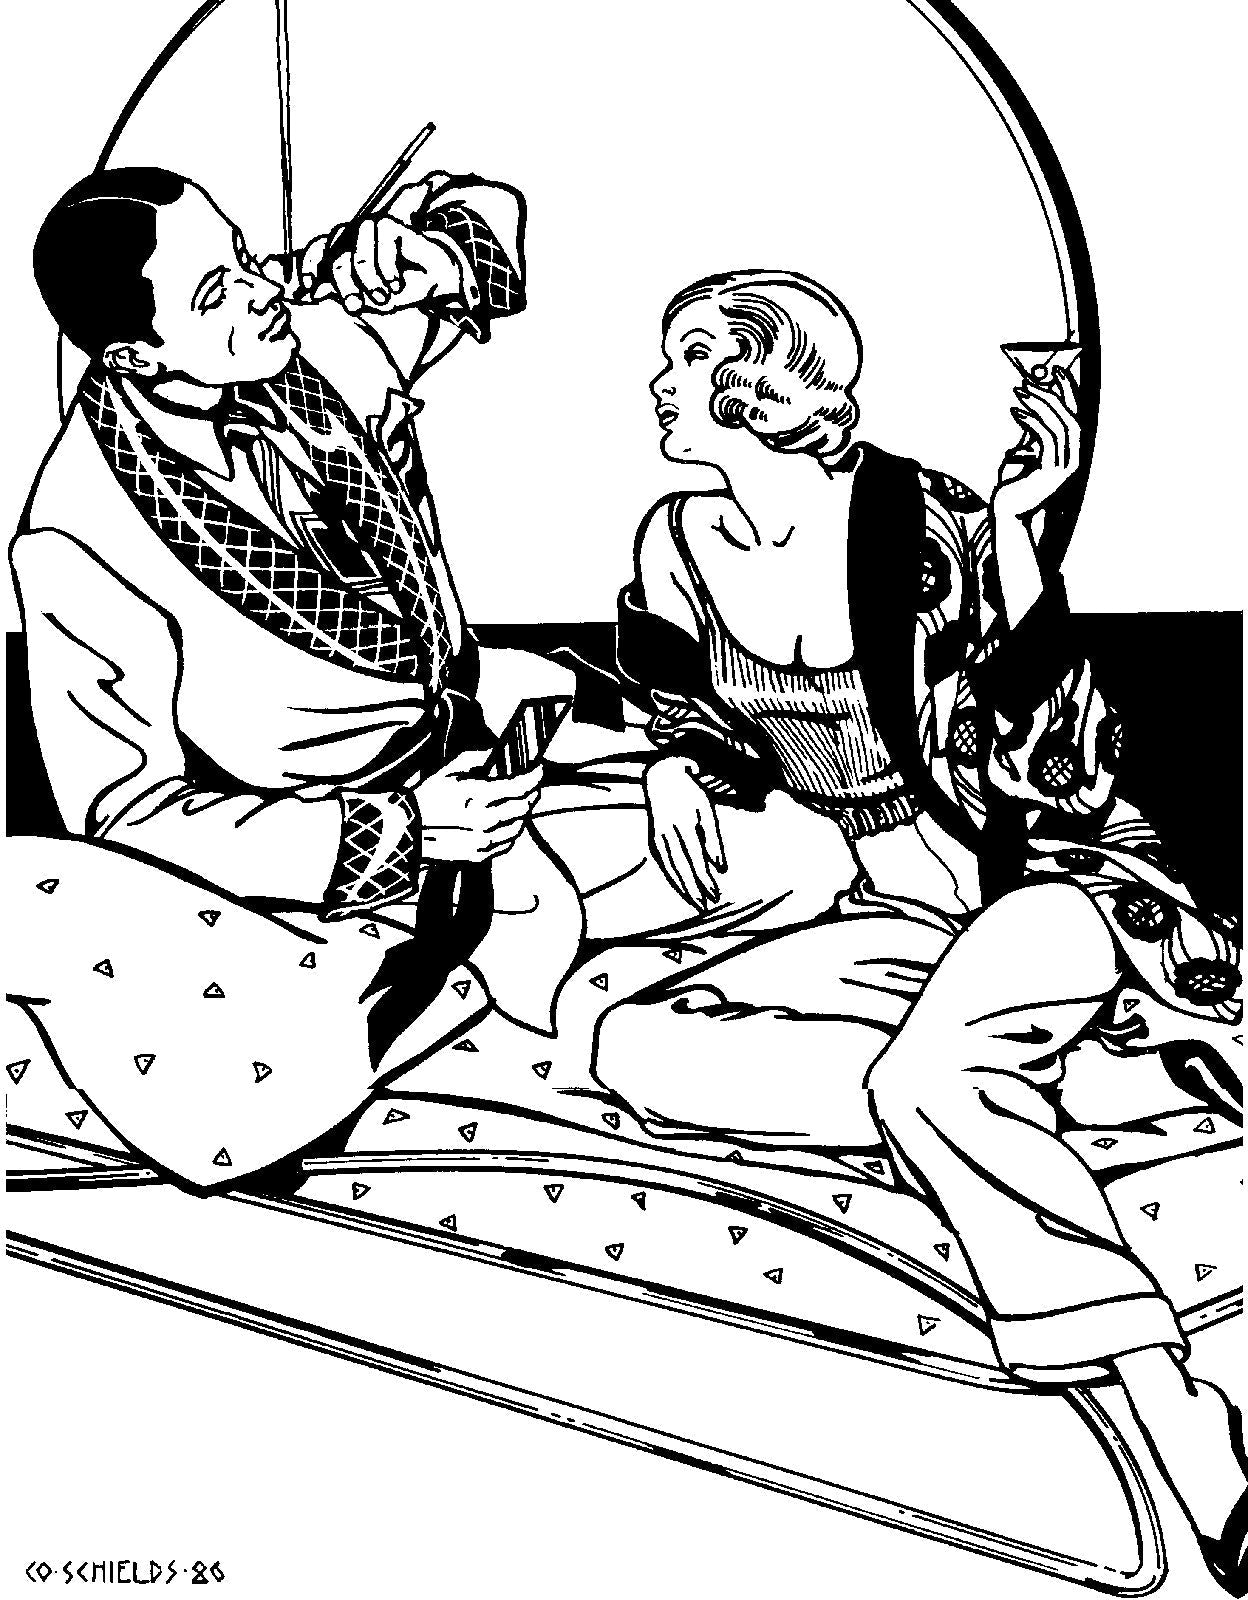 Black and white pen and in drawing by Gretchen Shields. Man and woman lounging, man is wearing Le Smoking Jacket while smoking and woman is drinking a cocktail wearing the Knitted Tan top and Le Smoking Jacket